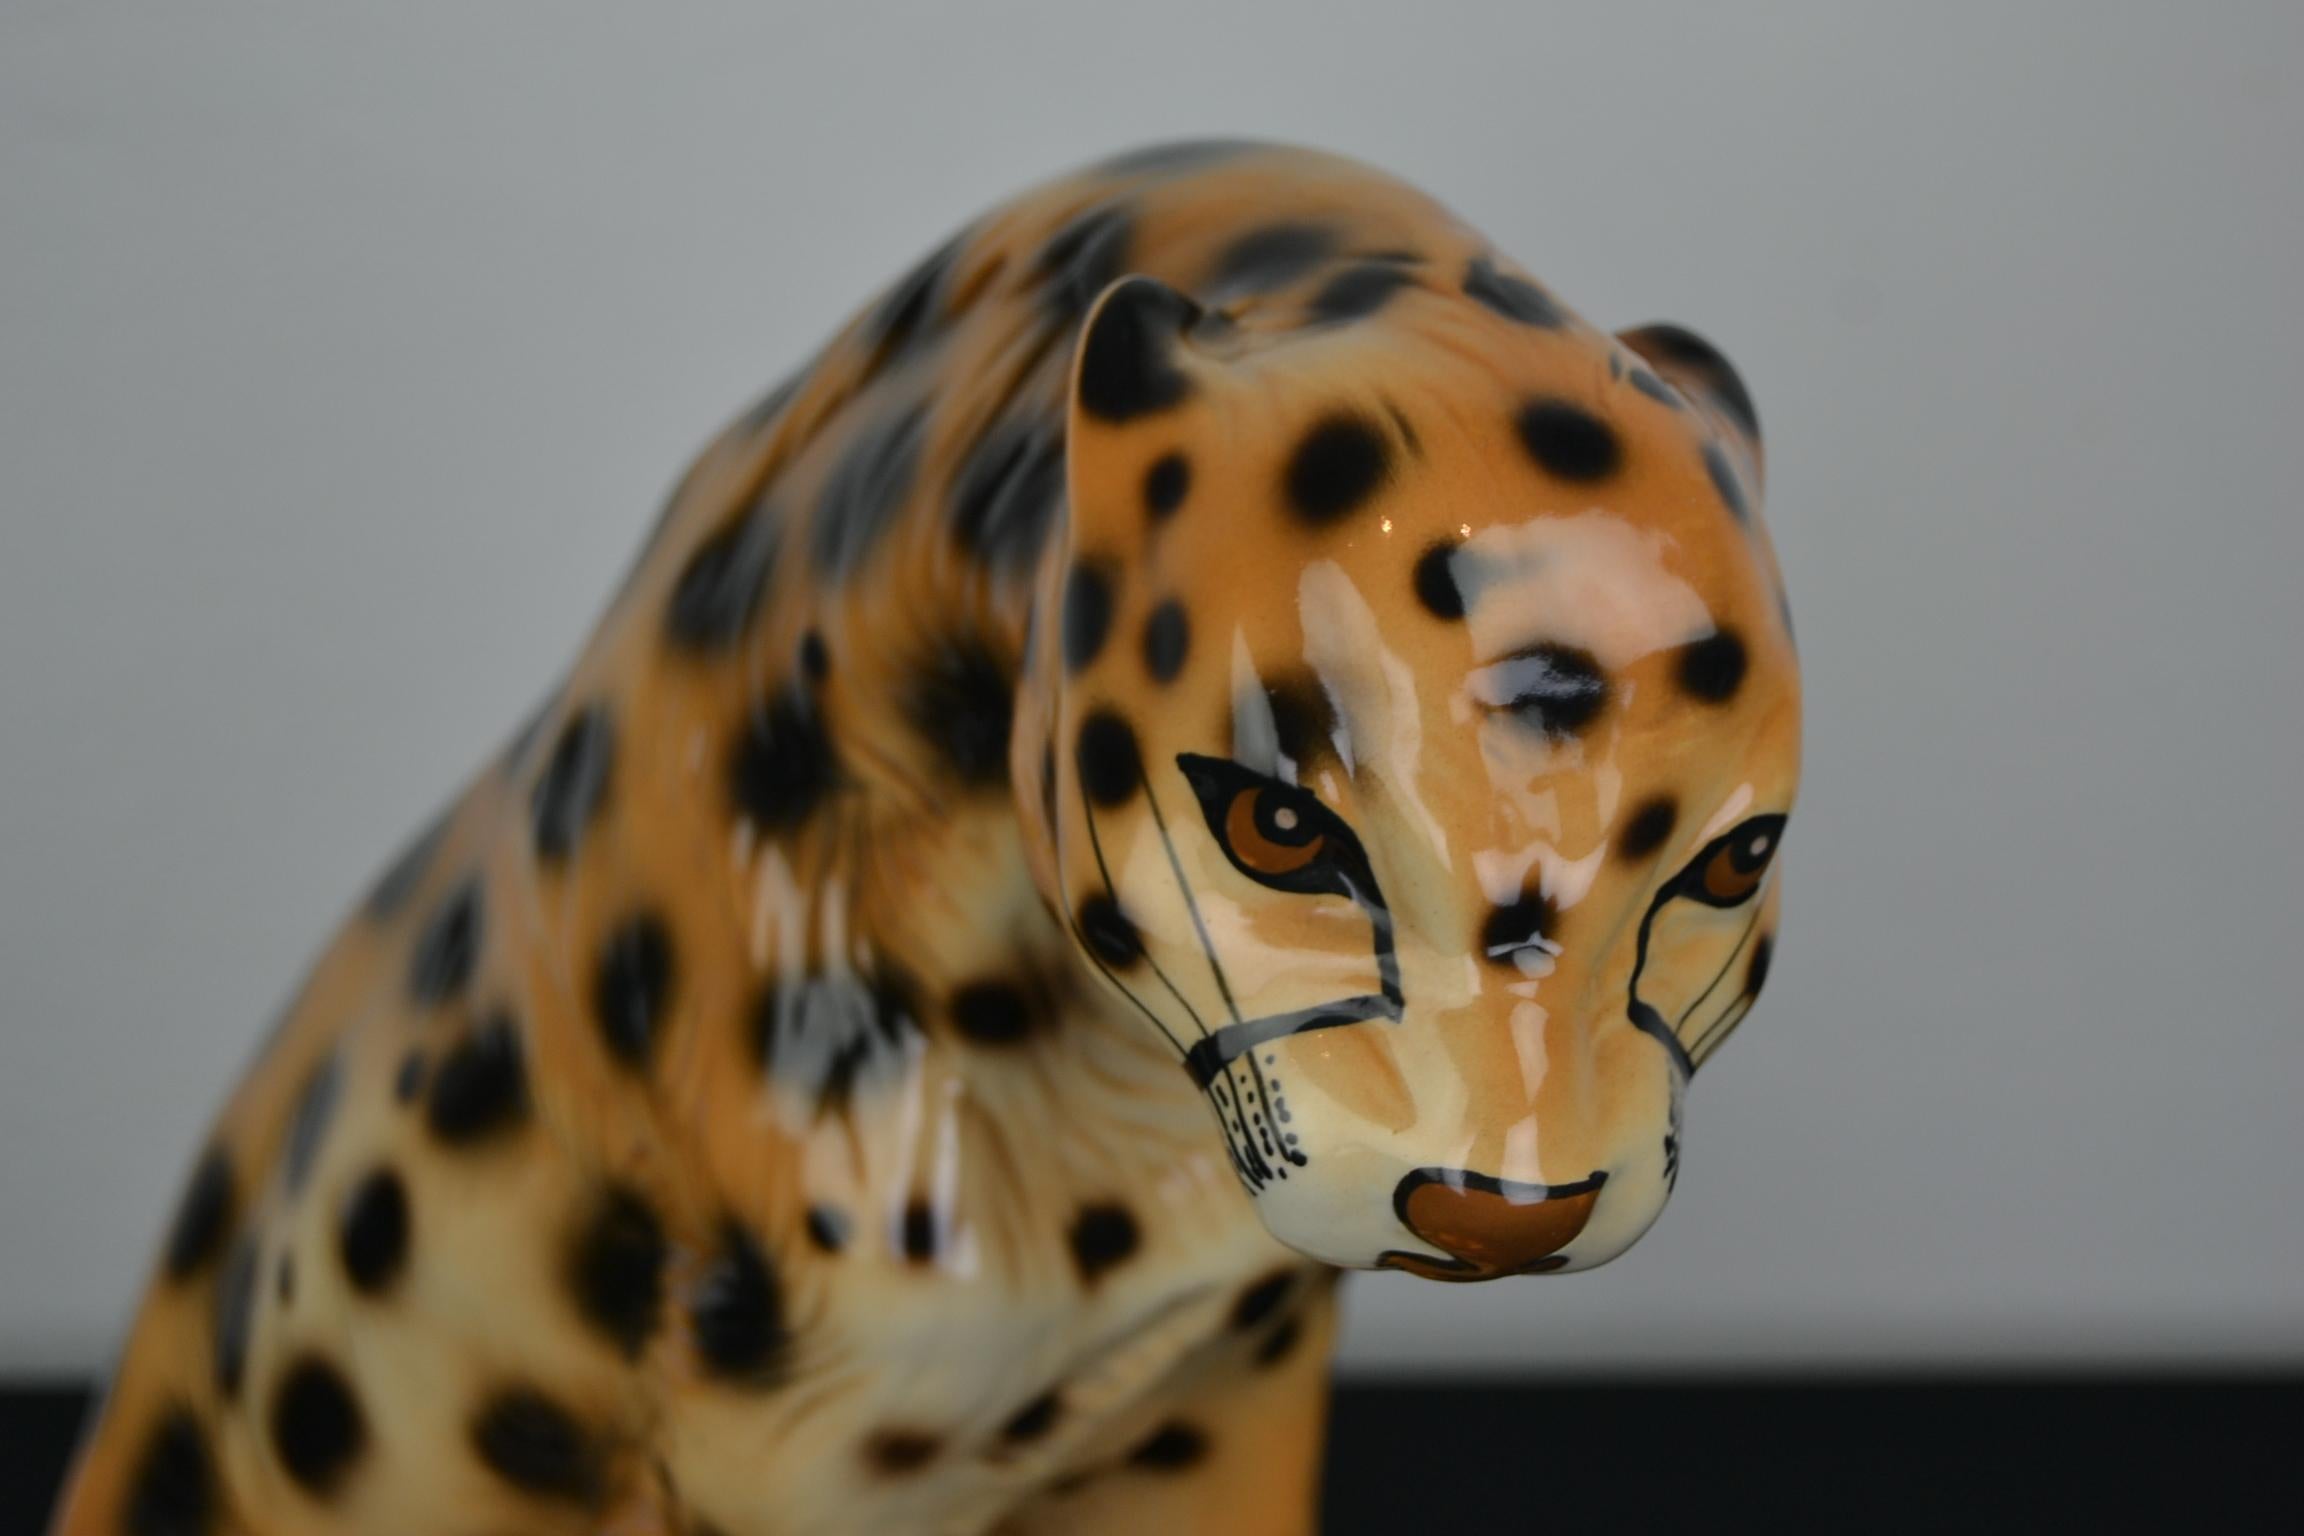 Vintage 1970s leopard sculpture.
This porcelain sculpture dates circa 1970s.
It's a sitting leopard animal hand painted in beautiful colors with beautiful details.
This stylish leopard sculpture is in beautiful condition. In the crease of his